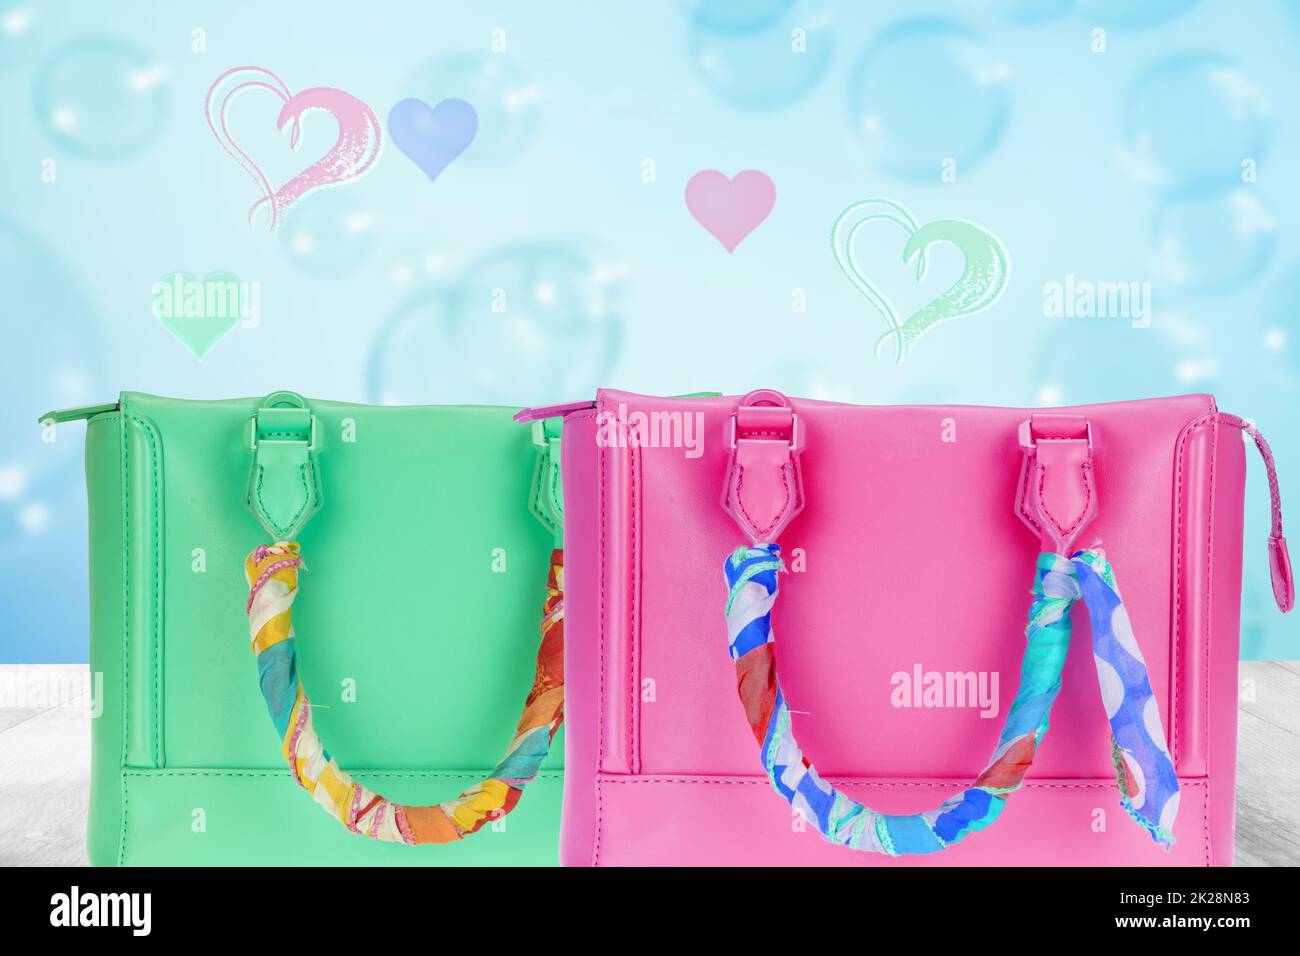 Happy Valentines or Mothers Day template. A beautiful green and a pink women's handbag decorated with a colourful cloth on the table over abstract blue heart background. Stock Photo